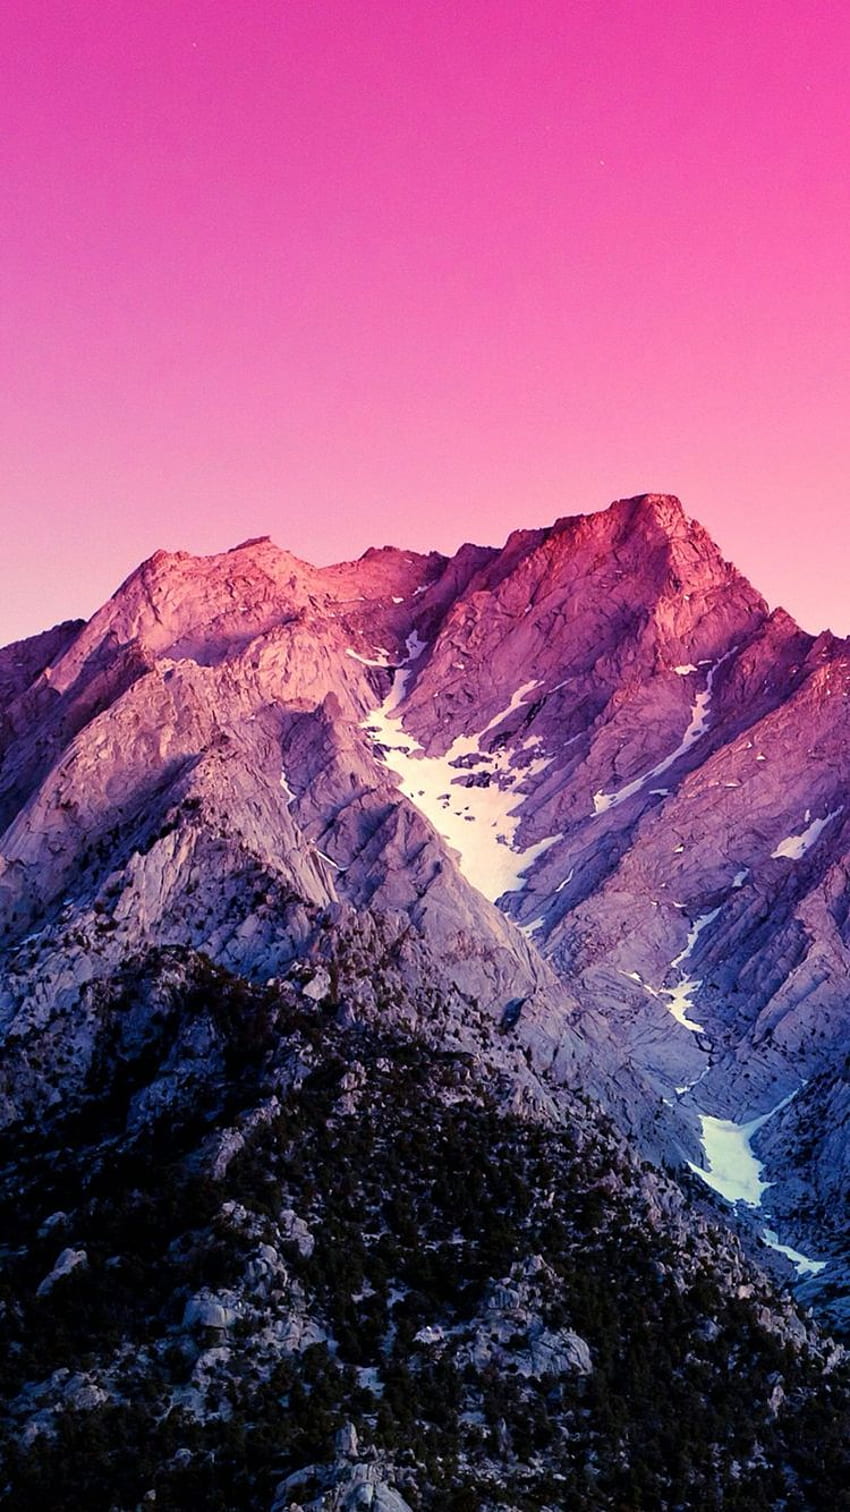 IPhone wallpaper of a pink sunset over a snow capped mountain range - Mountain, snow, clean